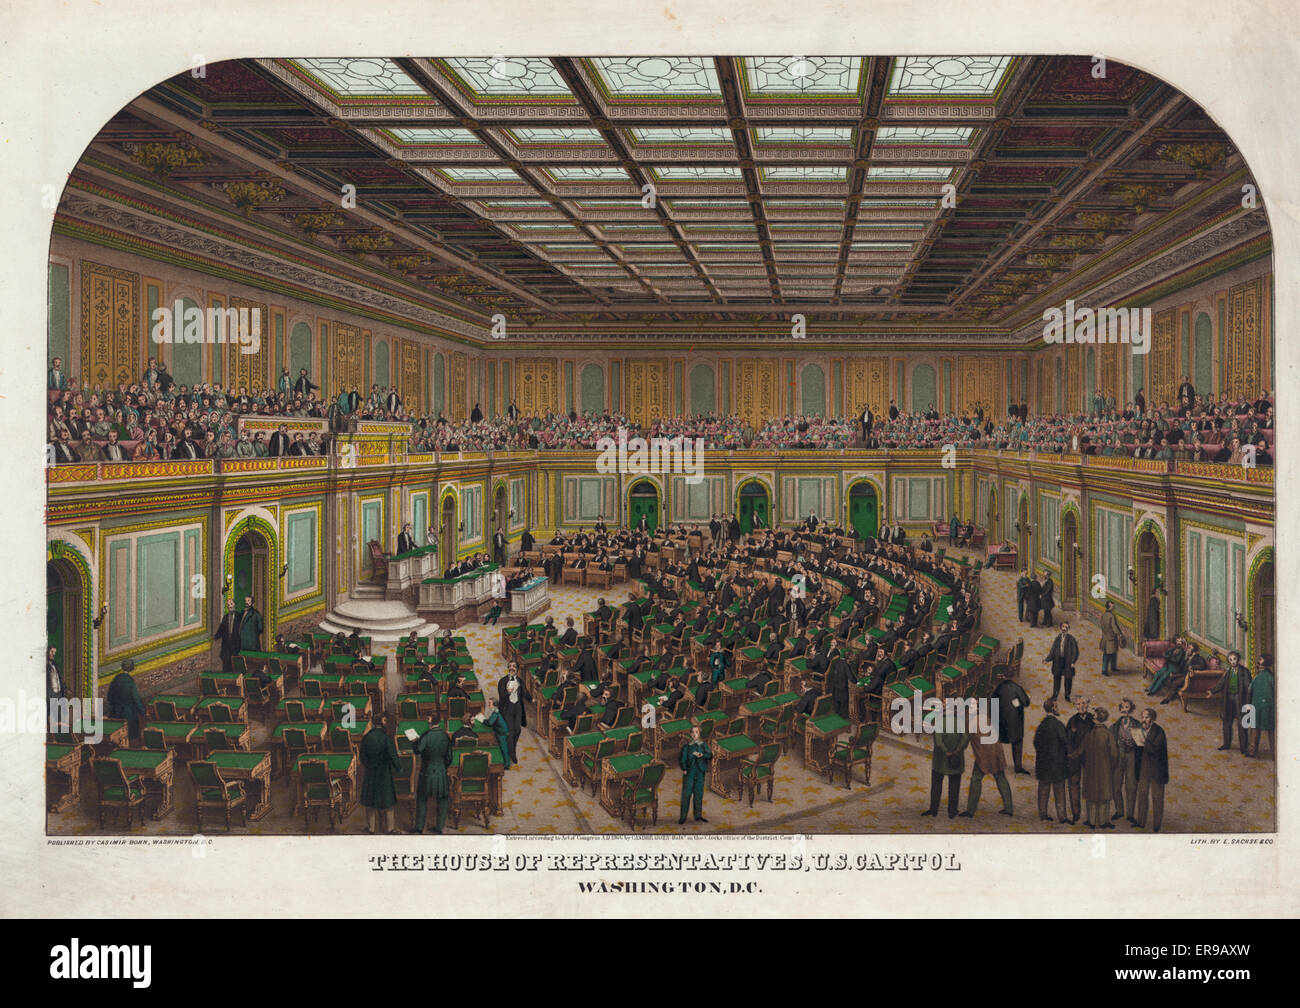 The House of Representatives, U.S. Capitol, Washington, D.C. Interior view of the House of Representatives wing of the U.S. Capitol showing Congress in session and spectators in the gallery. Date 1866. Stock Photo